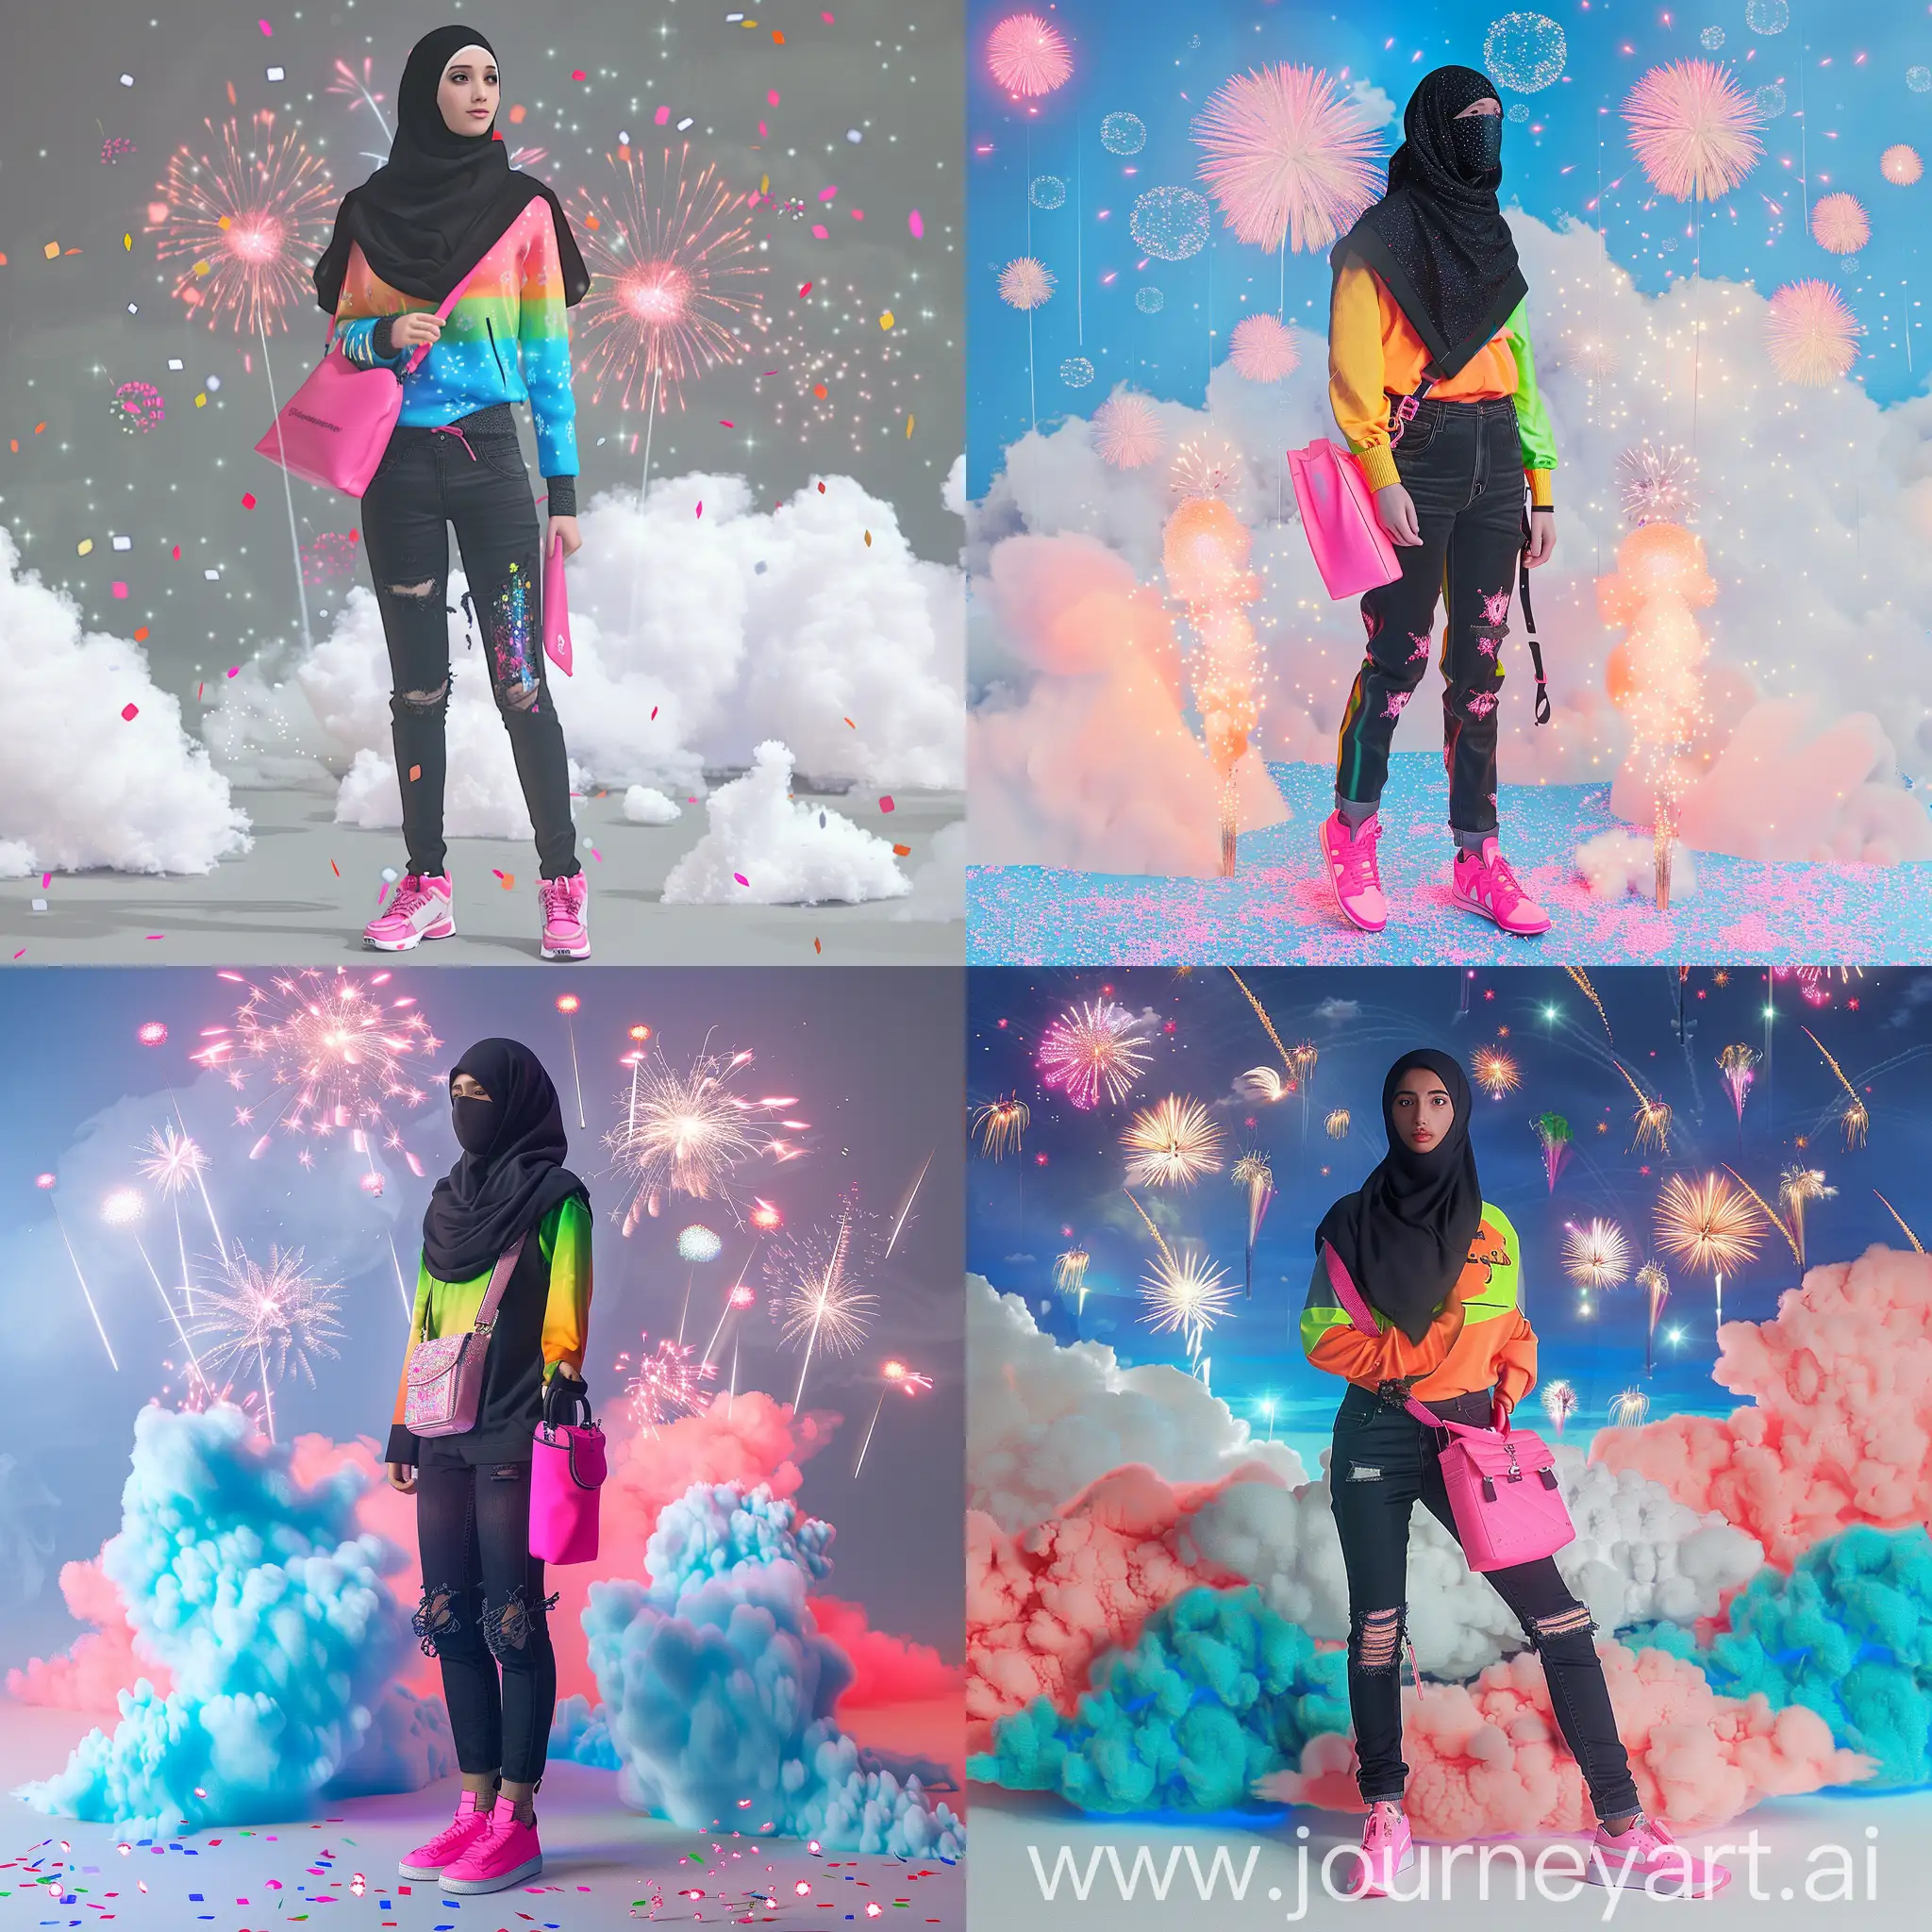 Vibrant-Muslim-Girl-with-Pink-Bag-Amidst-Fireworks-and-Fluffy-Clouds